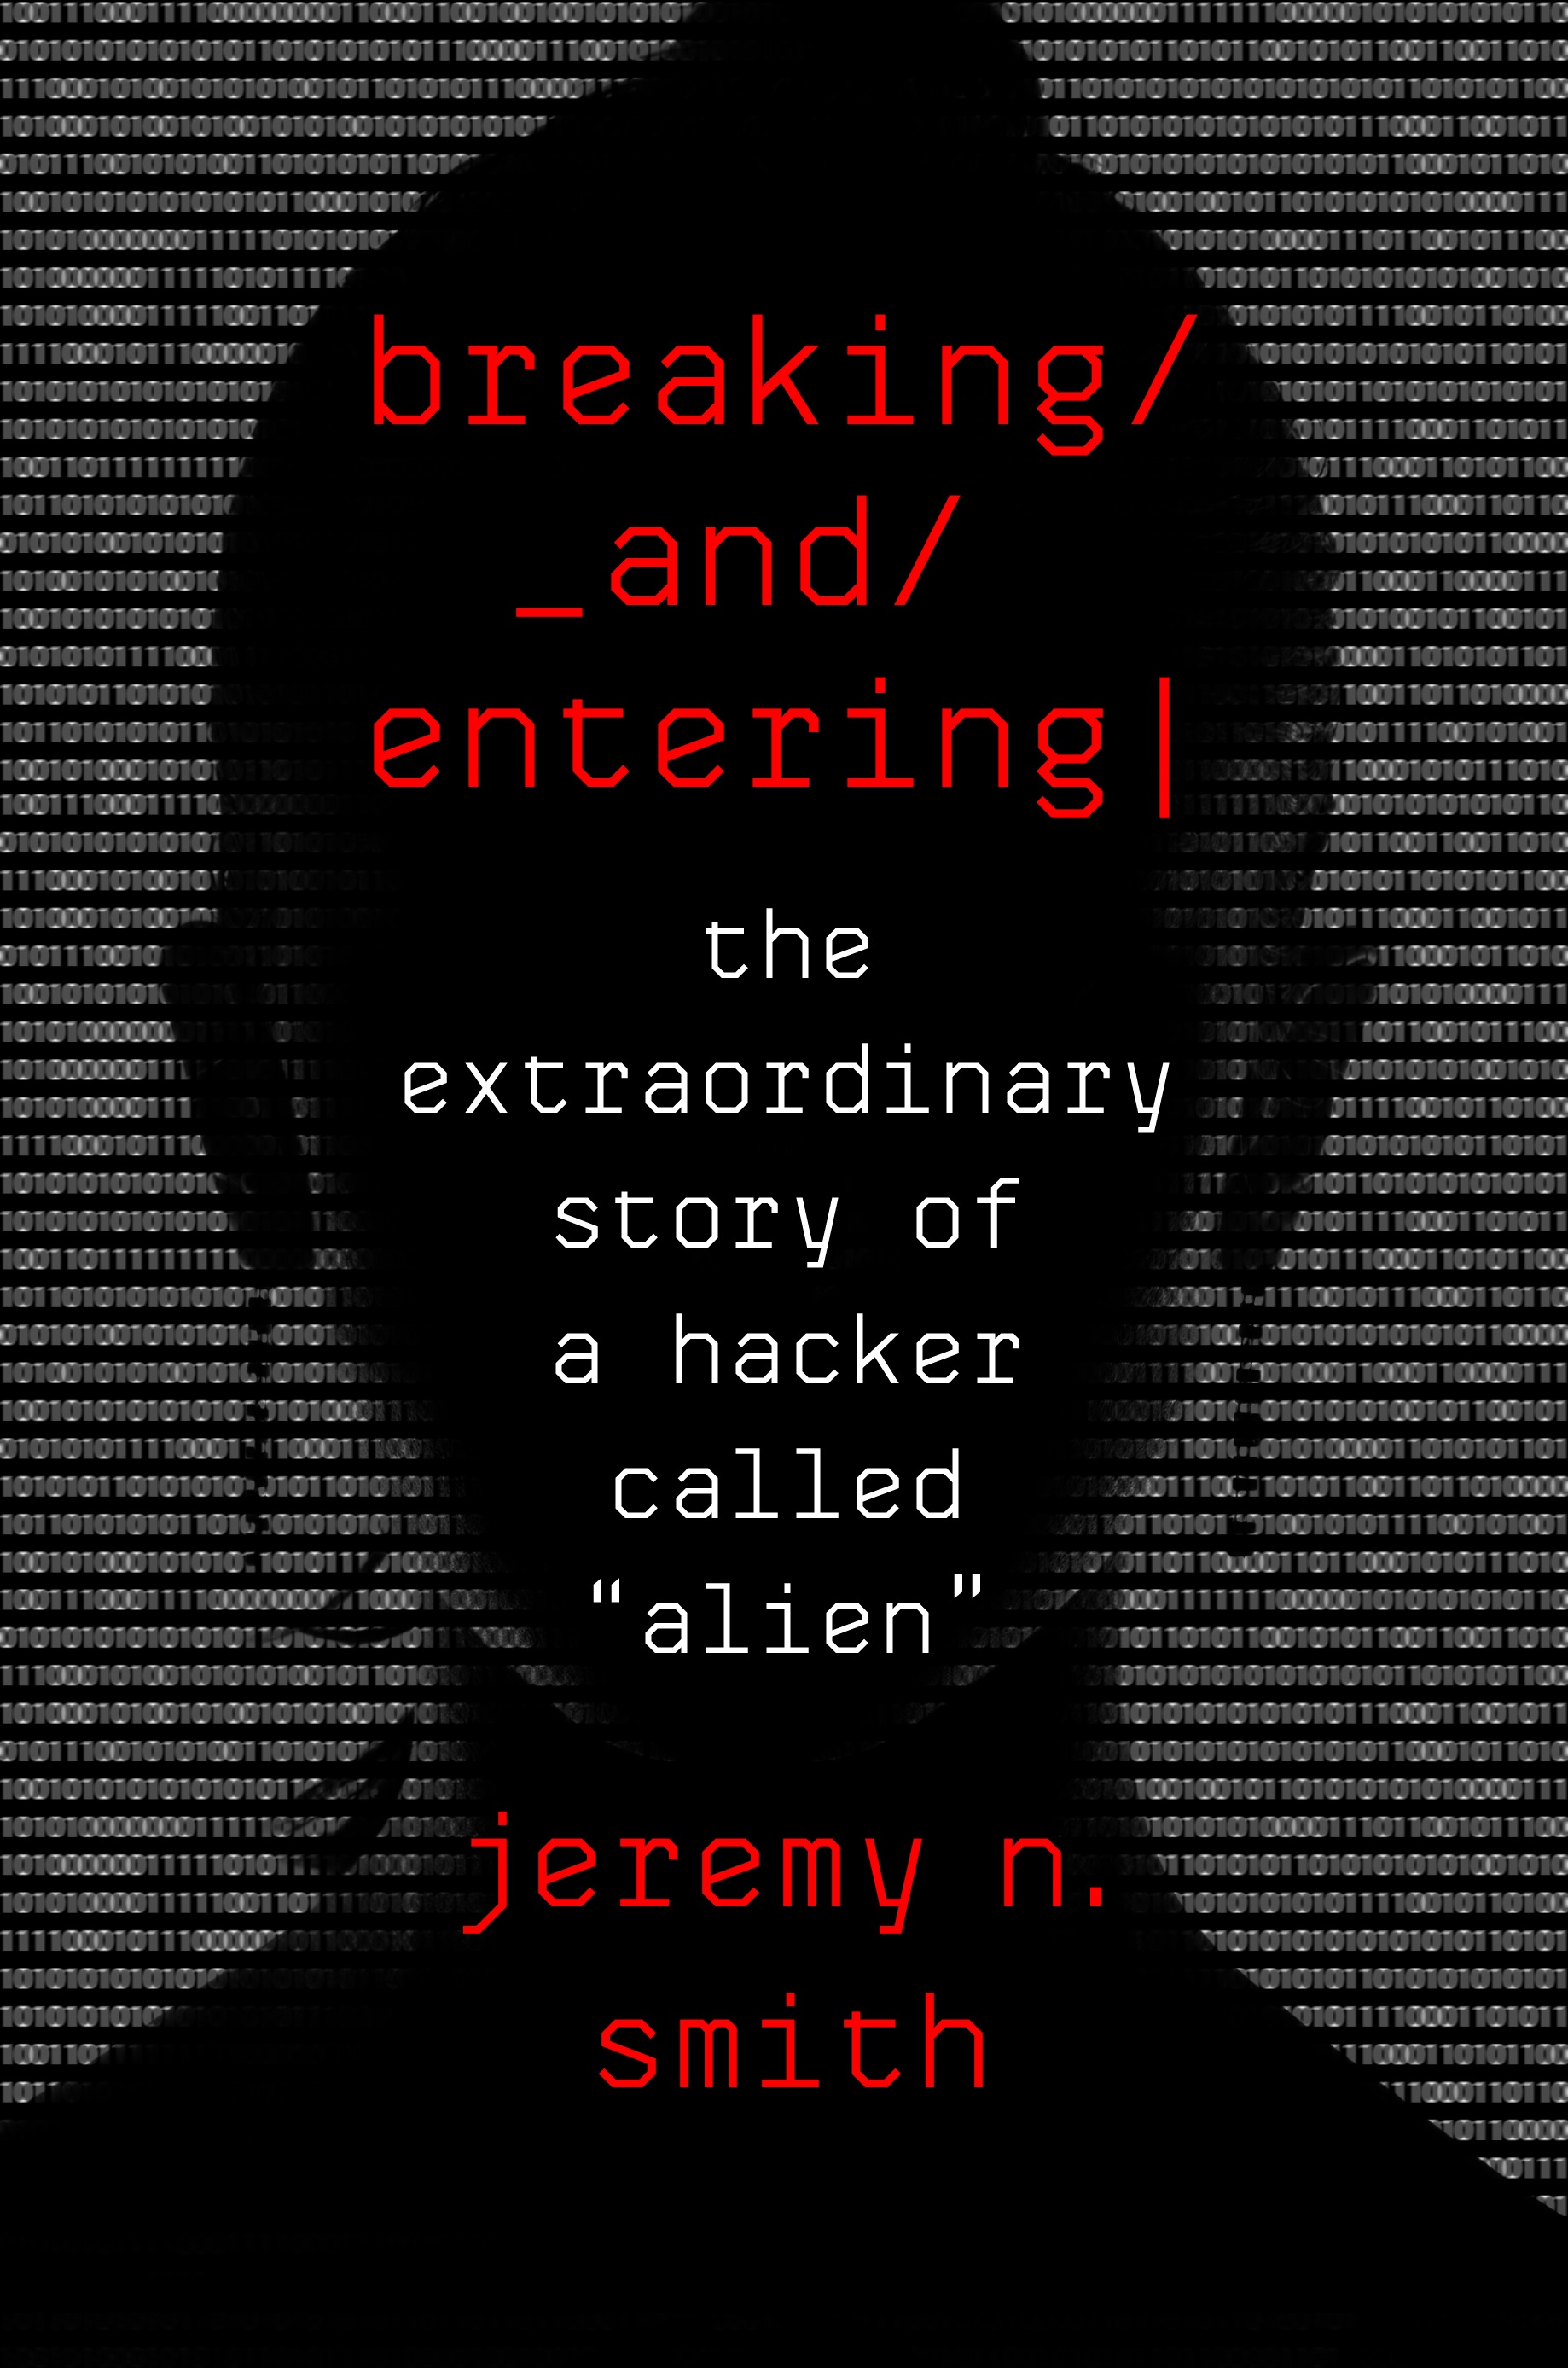 Book Launch: Breaking and Entering: The Extraordinary Story of a Hacker Called “Alien” by Jeremy Smith